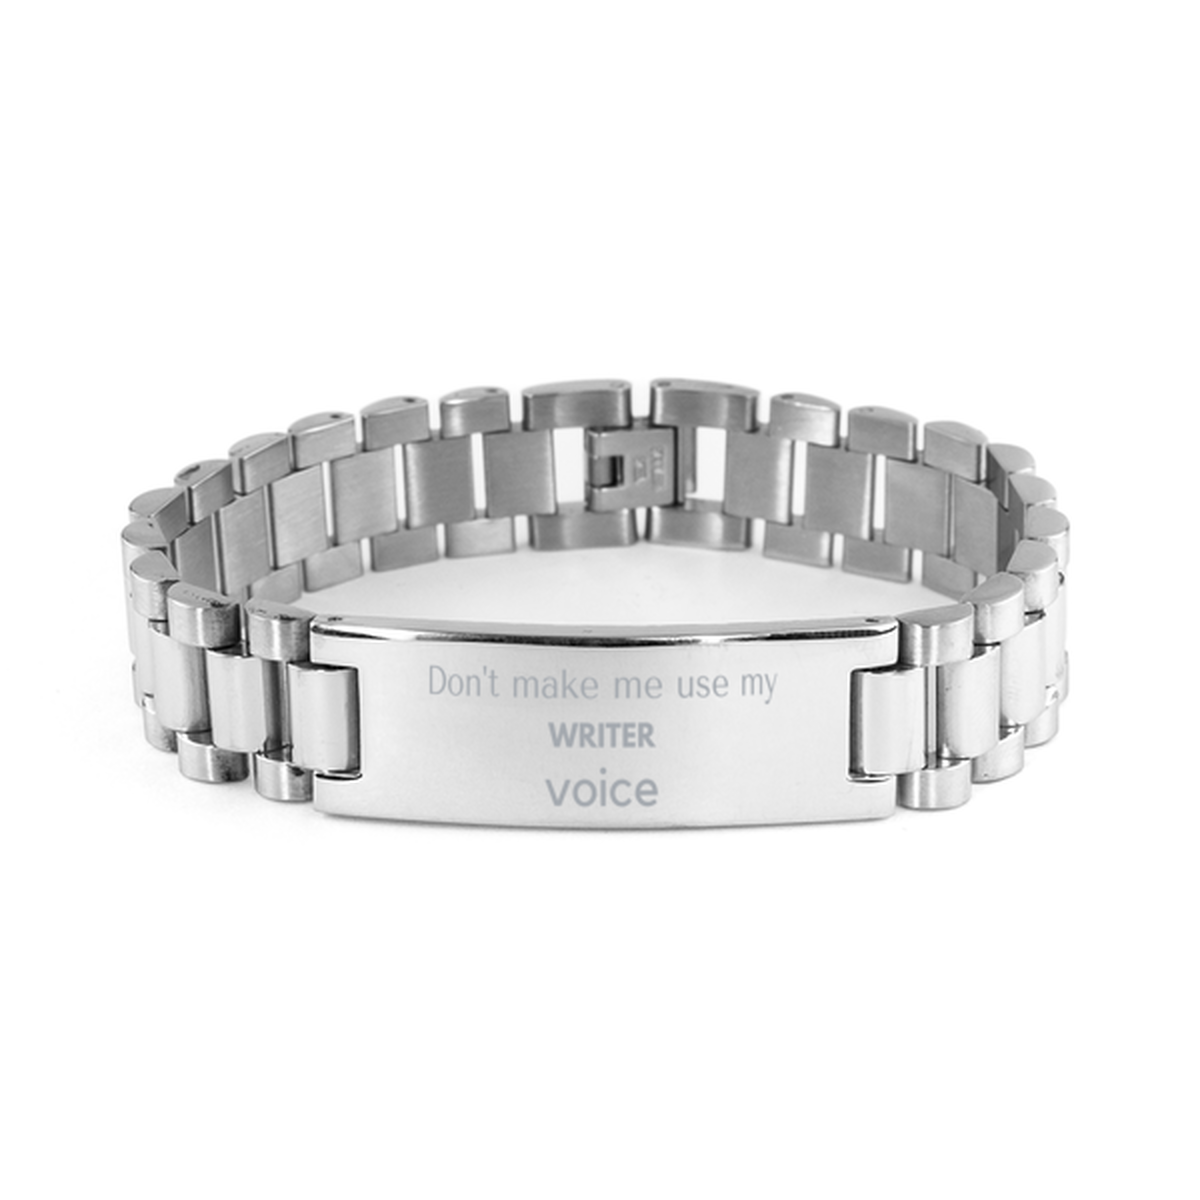 Don't make me use my Writer voice, Sarcasm Writer Gifts, Christmas Writer Ladder Stainless Steel Bracelet Birthday Unique Gifts For Writer Coworkers, Men, Women, Colleague, Friends